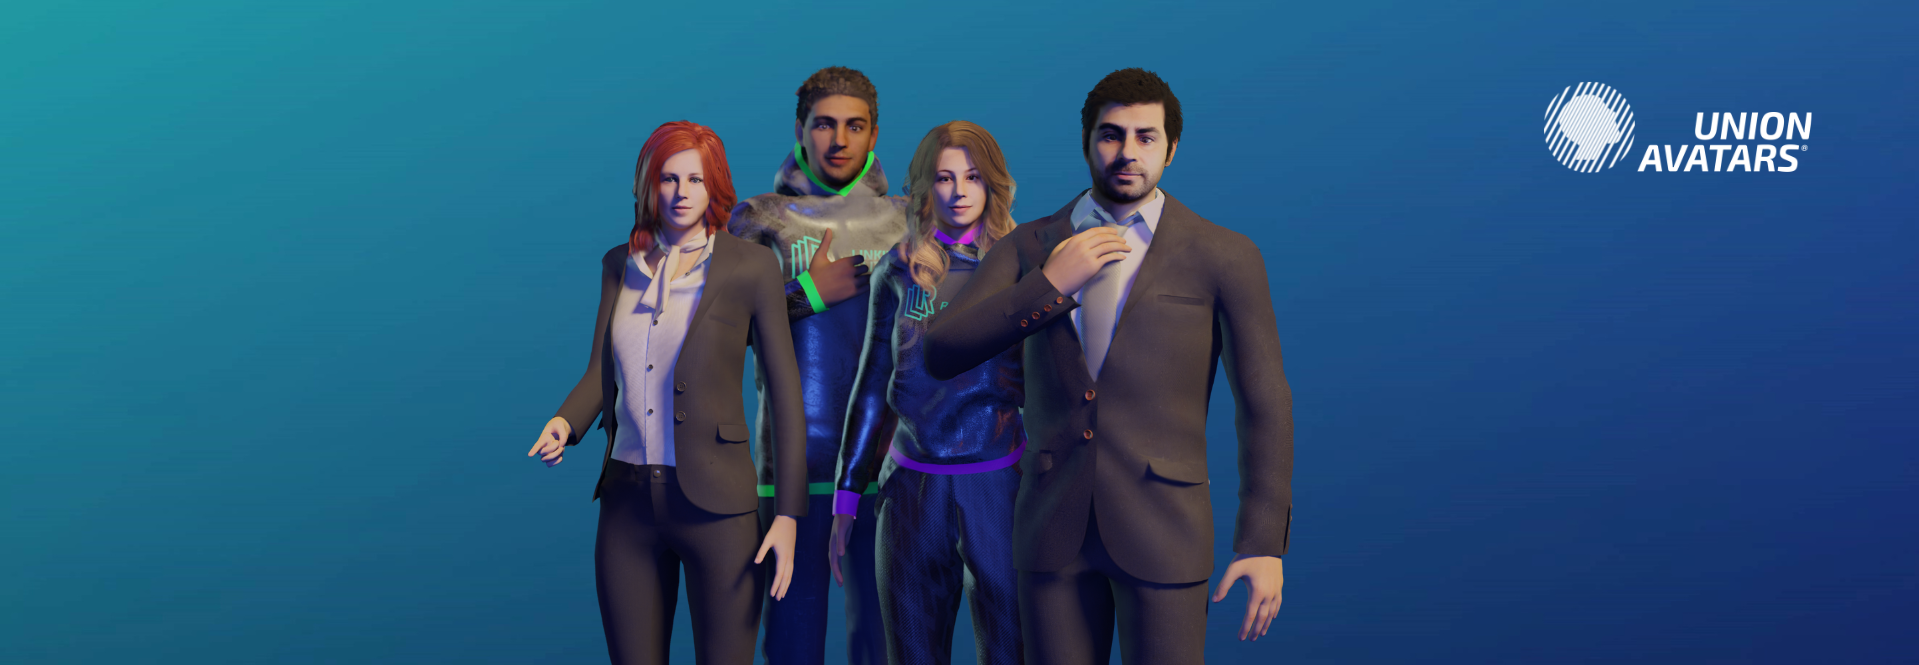 Realistic Avatars and the Metaverse, ar, vr and web3.